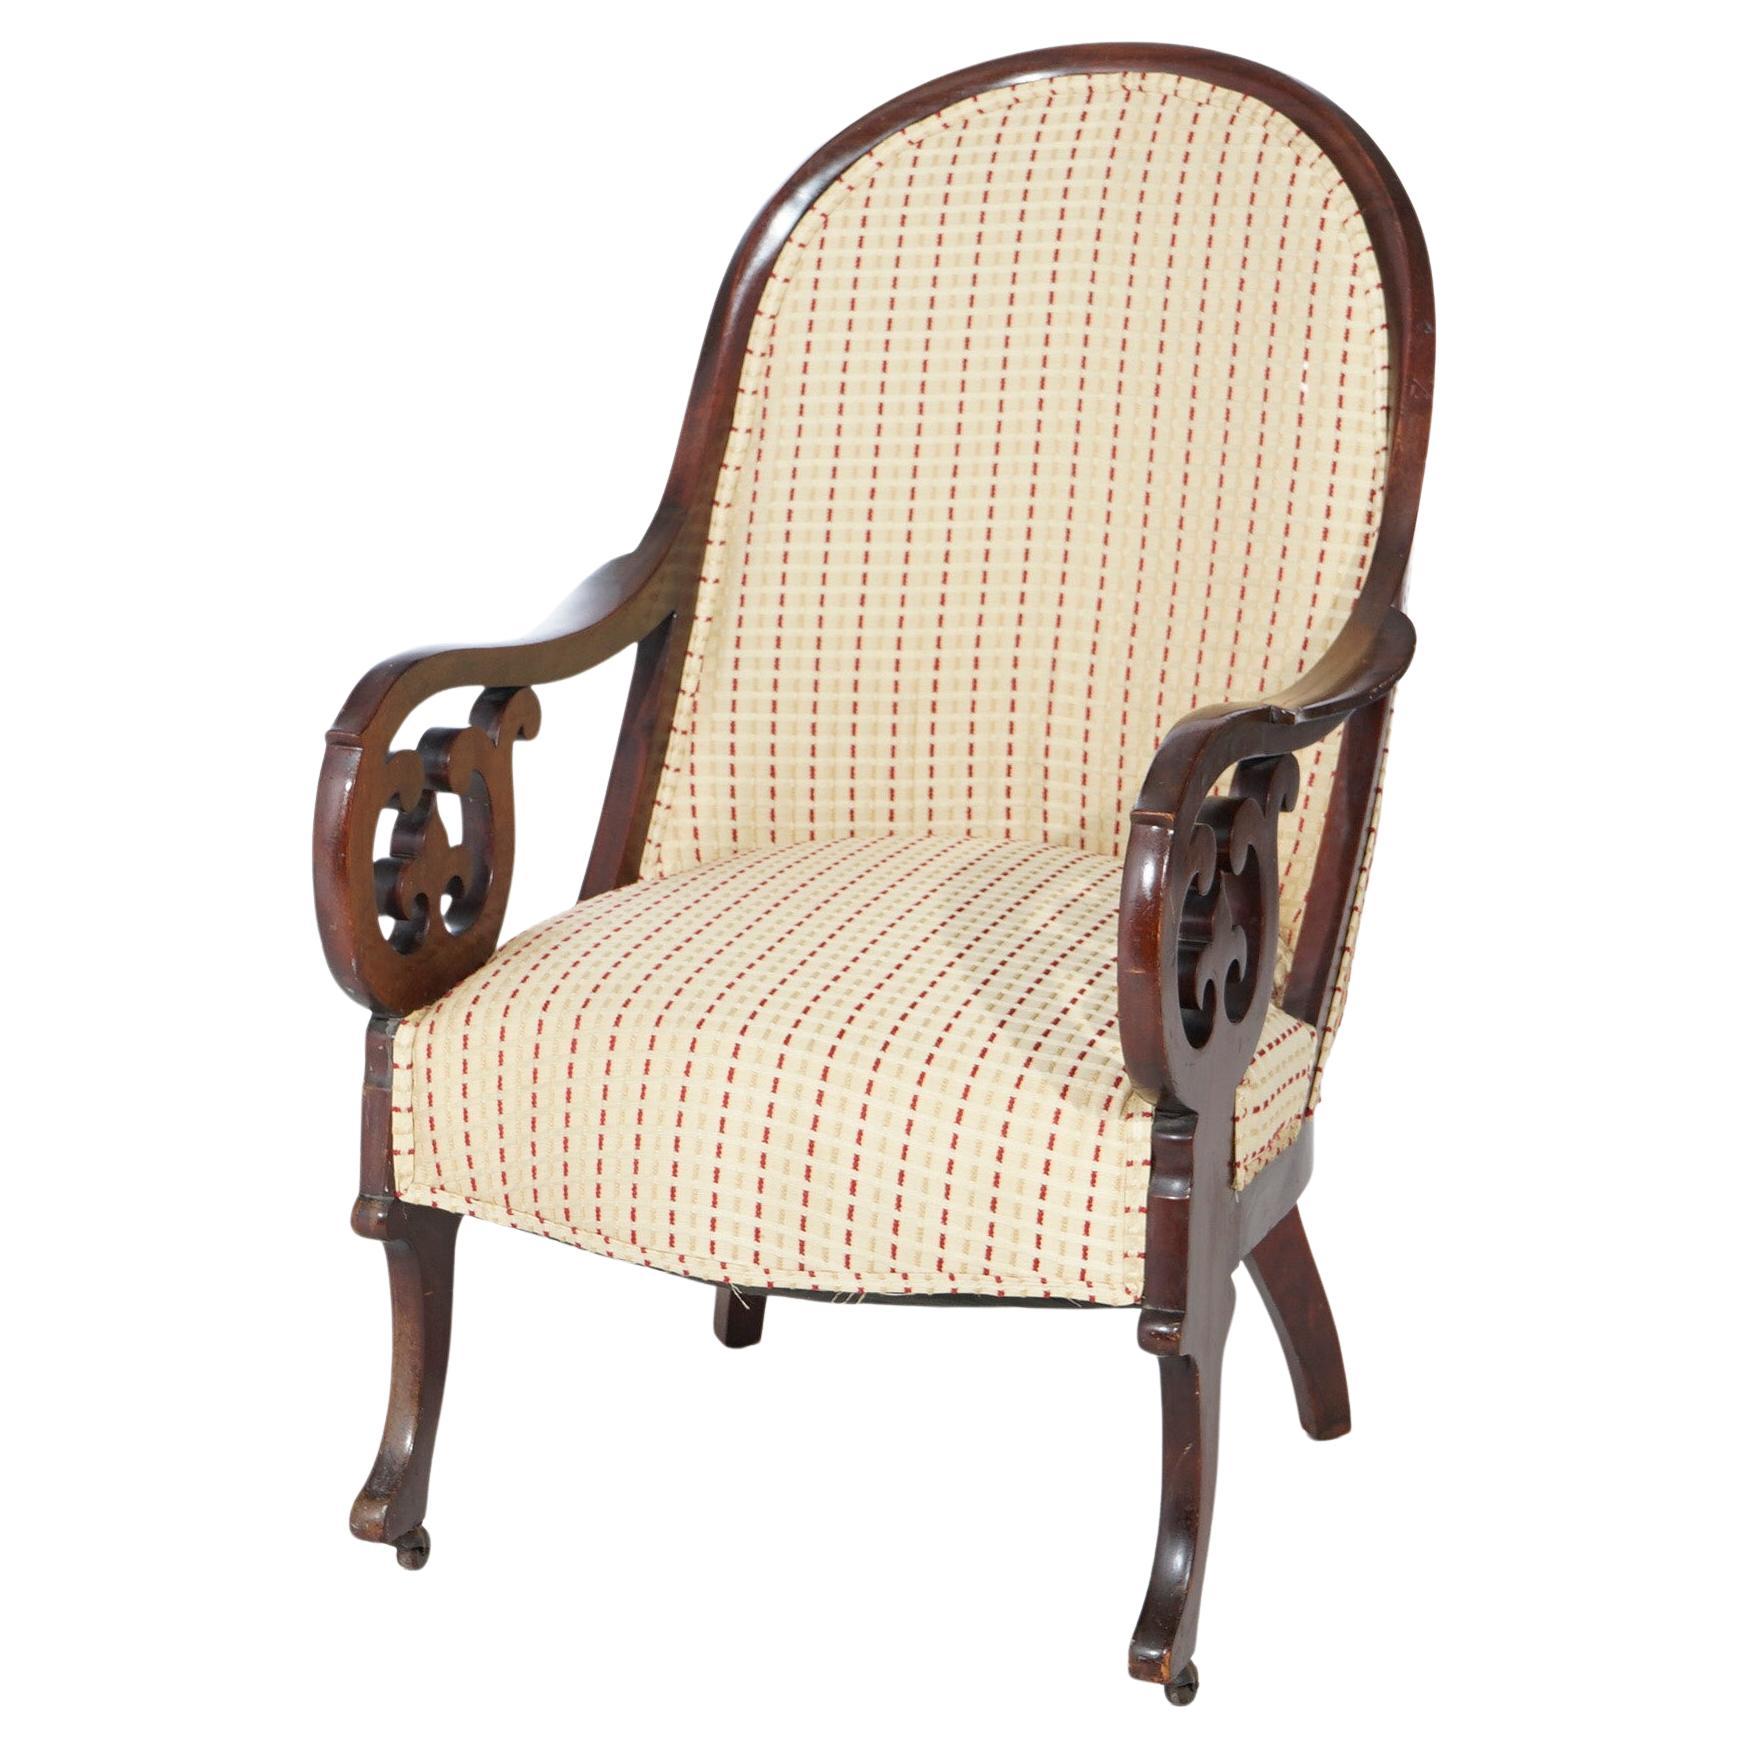 An antique Lincoln arm chair offers carved walnut frame with upholstered back and seat, carved scroll form arms with fleur de lis elements, c1880.

Measures- 38.5''H x 24.75''W x 31''D.